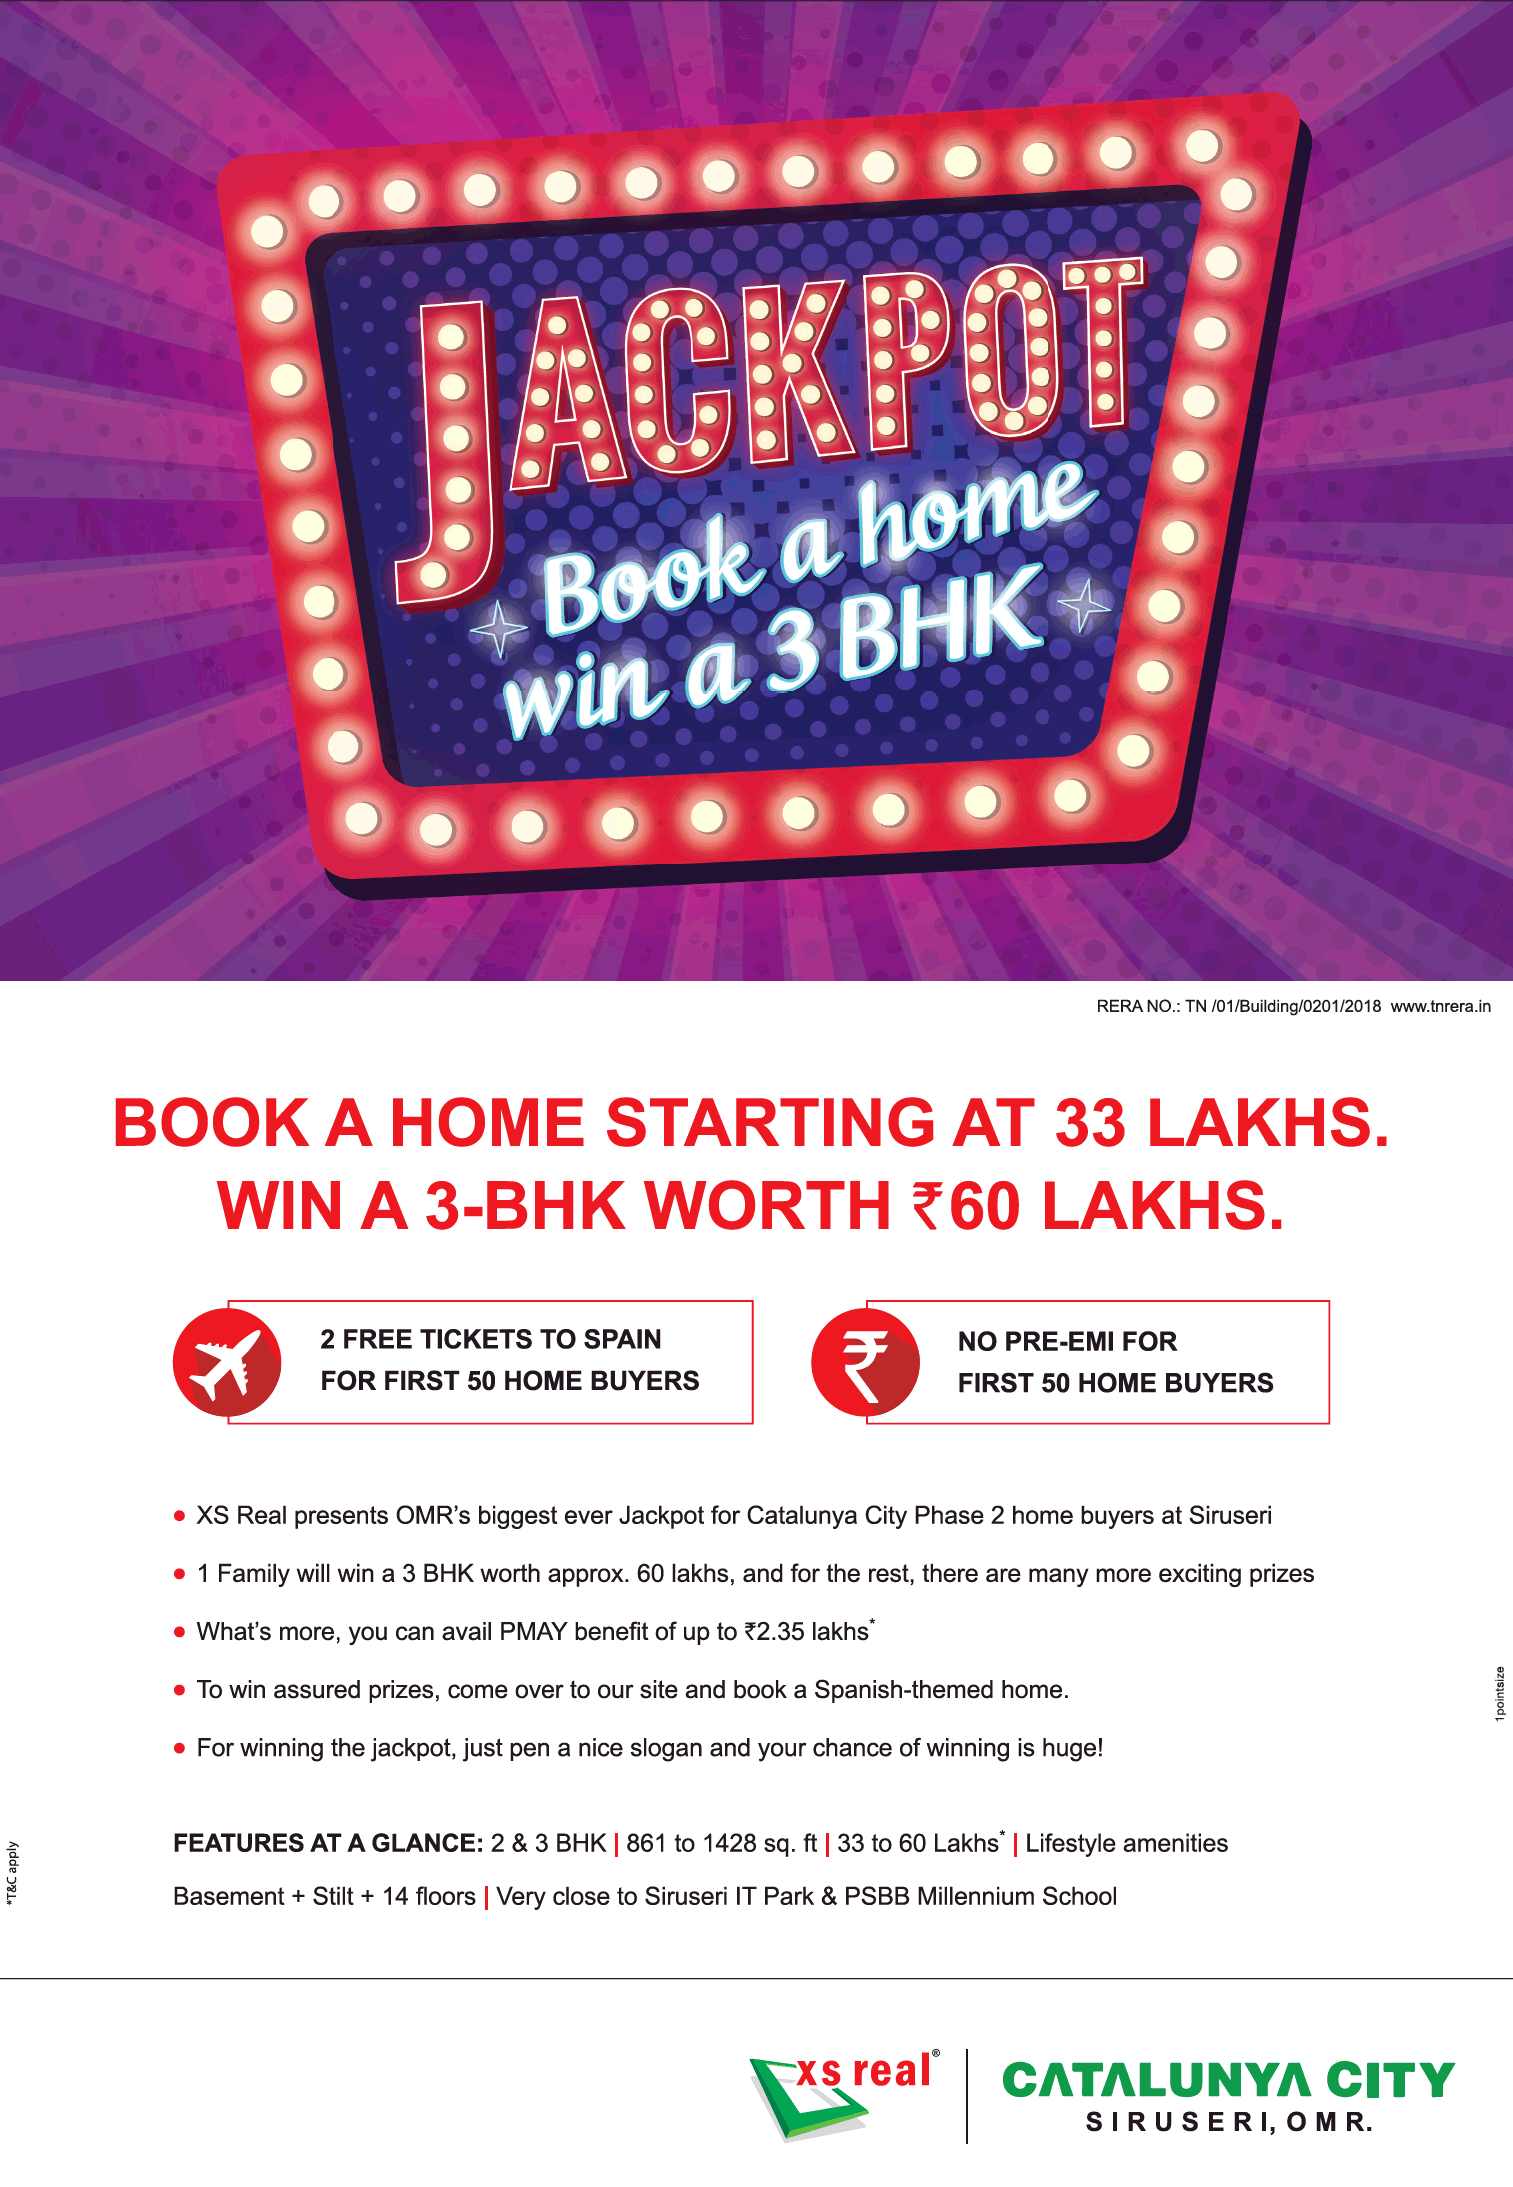 Book a home & get a chance to win a 3 BHK worth Rs 60 Lakhs at XS Real Catalunya City in Chennai Update